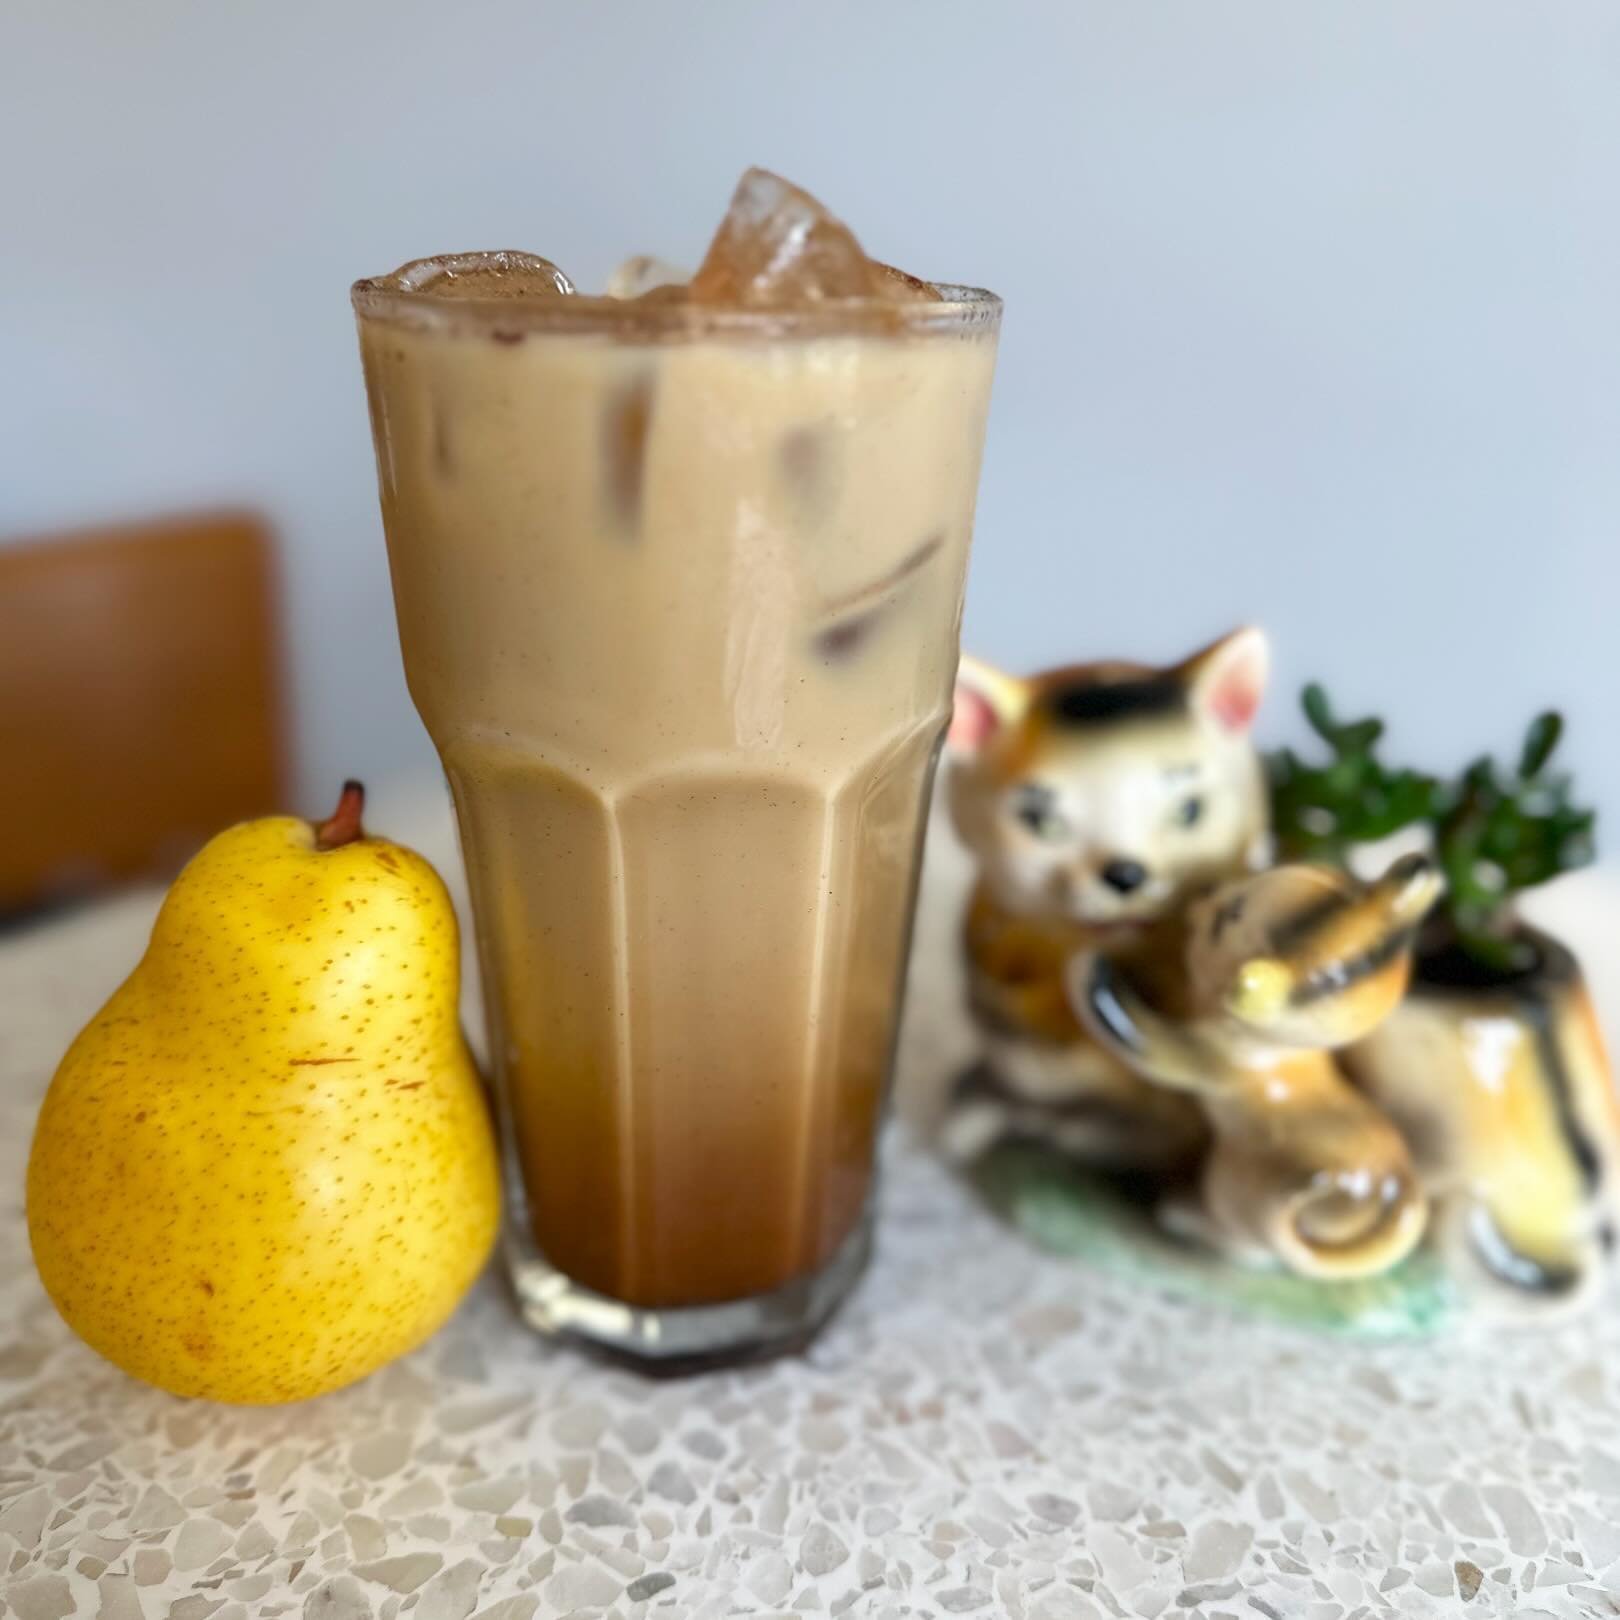 Forty-four degrees and sunny means it&rsquo;s iced drink time, right? How about an iced caramel pear latte? Sweet, velvety, and a little decadent. ☀️🥤🍐 #buckminsterscatcafe #icedlatte #catcafefood